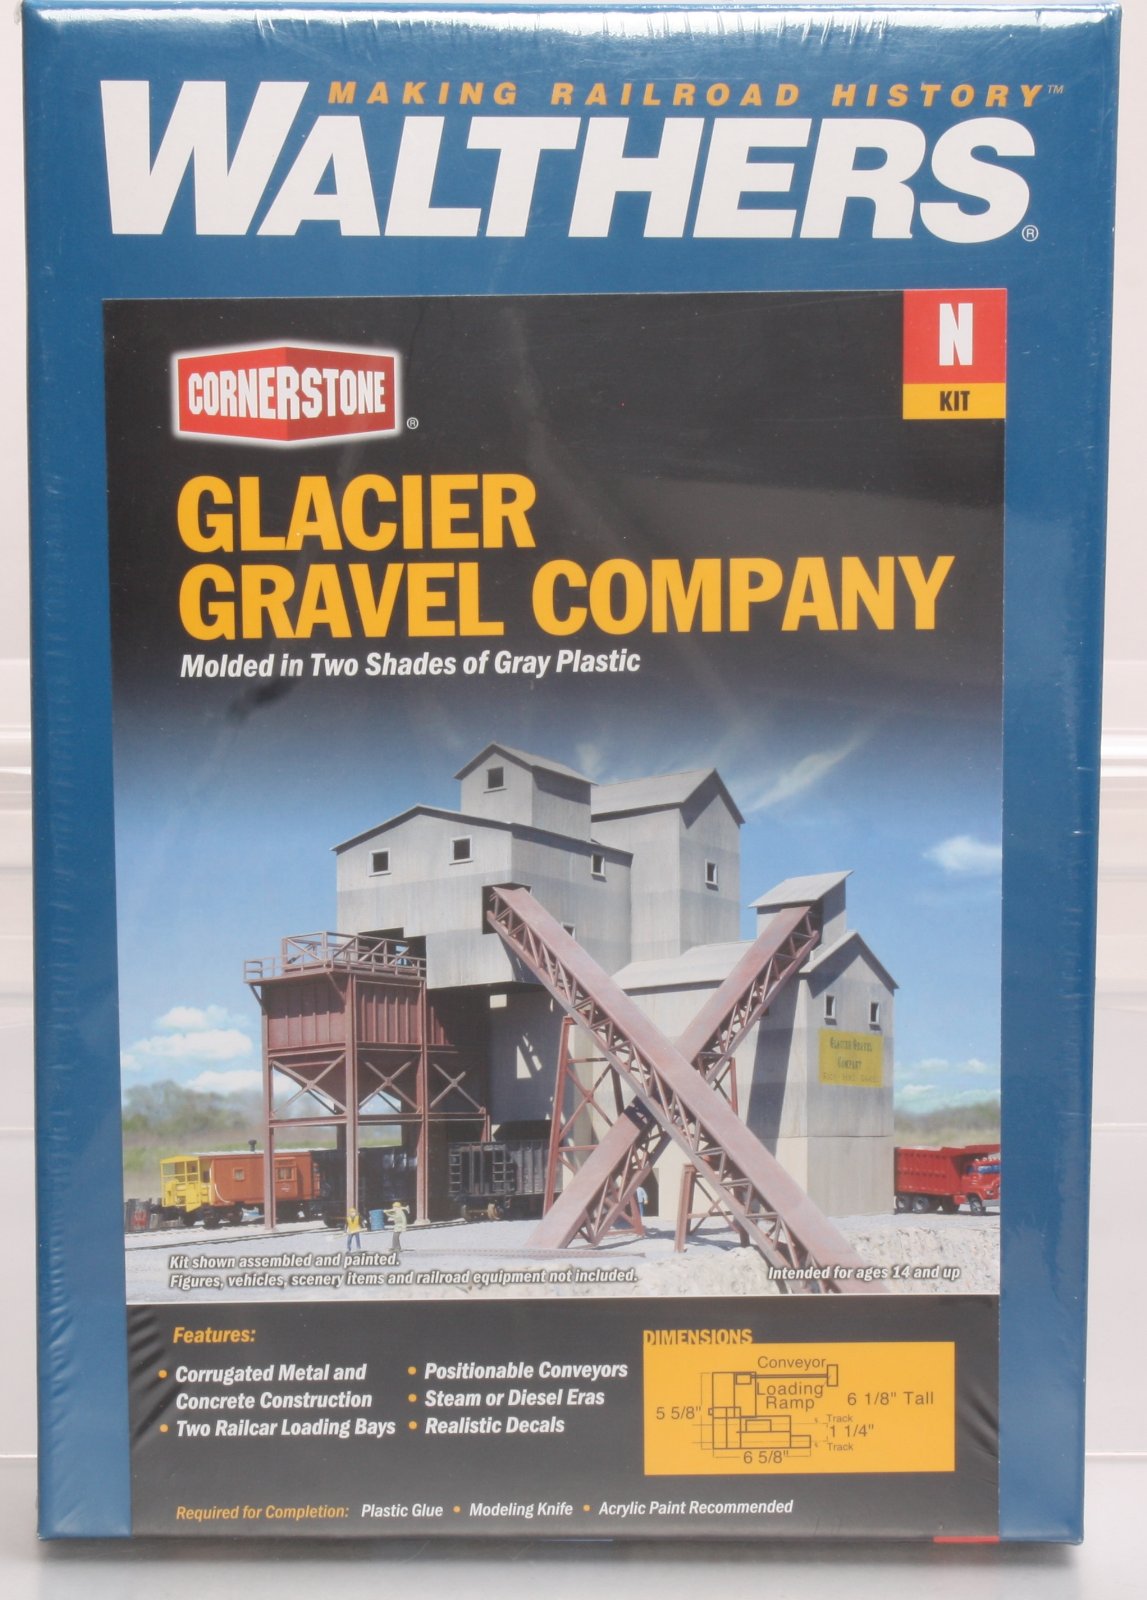 Walthers 933-3241 N Glacier Gravel Co. Industrial Building Kit